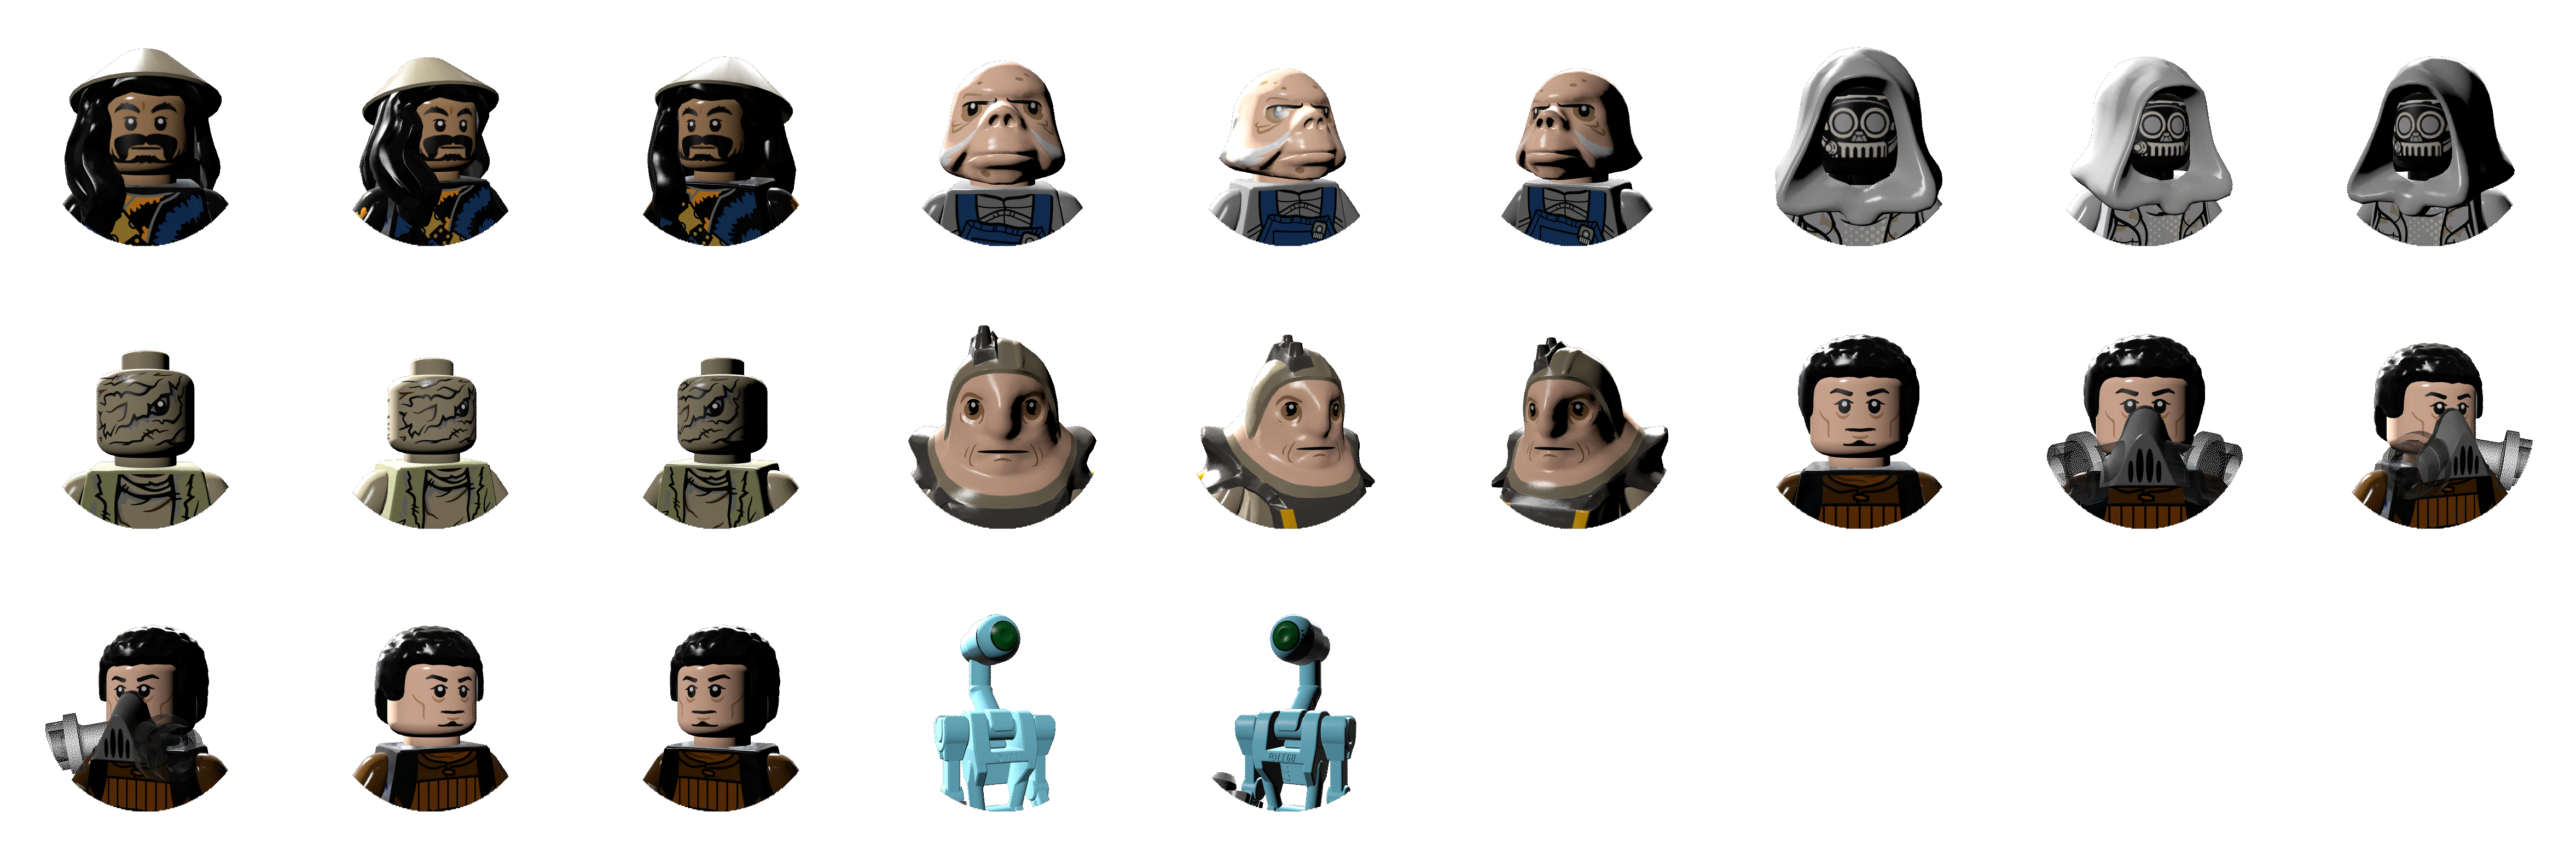 LEGO Star Wars: The Force Awakens - Character Icons (U-V)